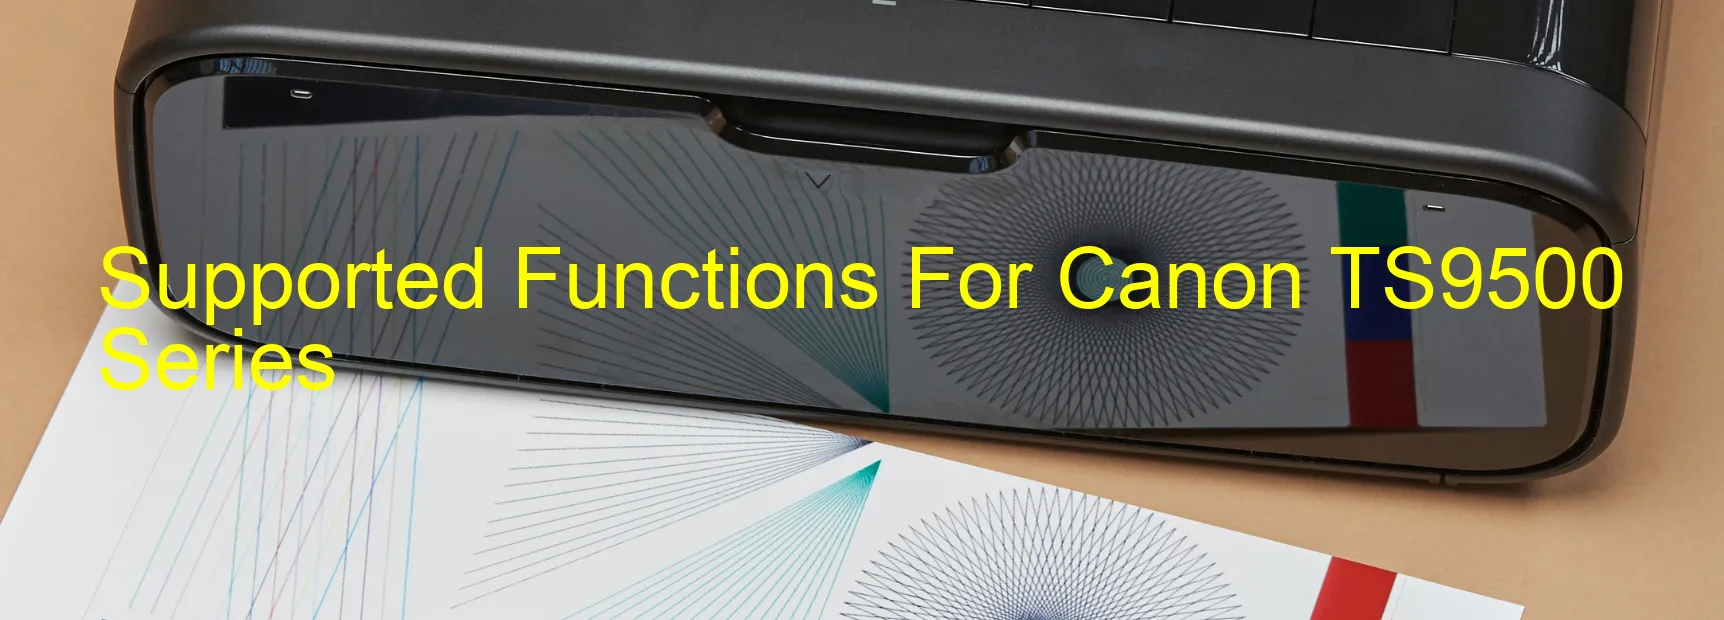 supported-functions-for-canon-ts9500-series.webp